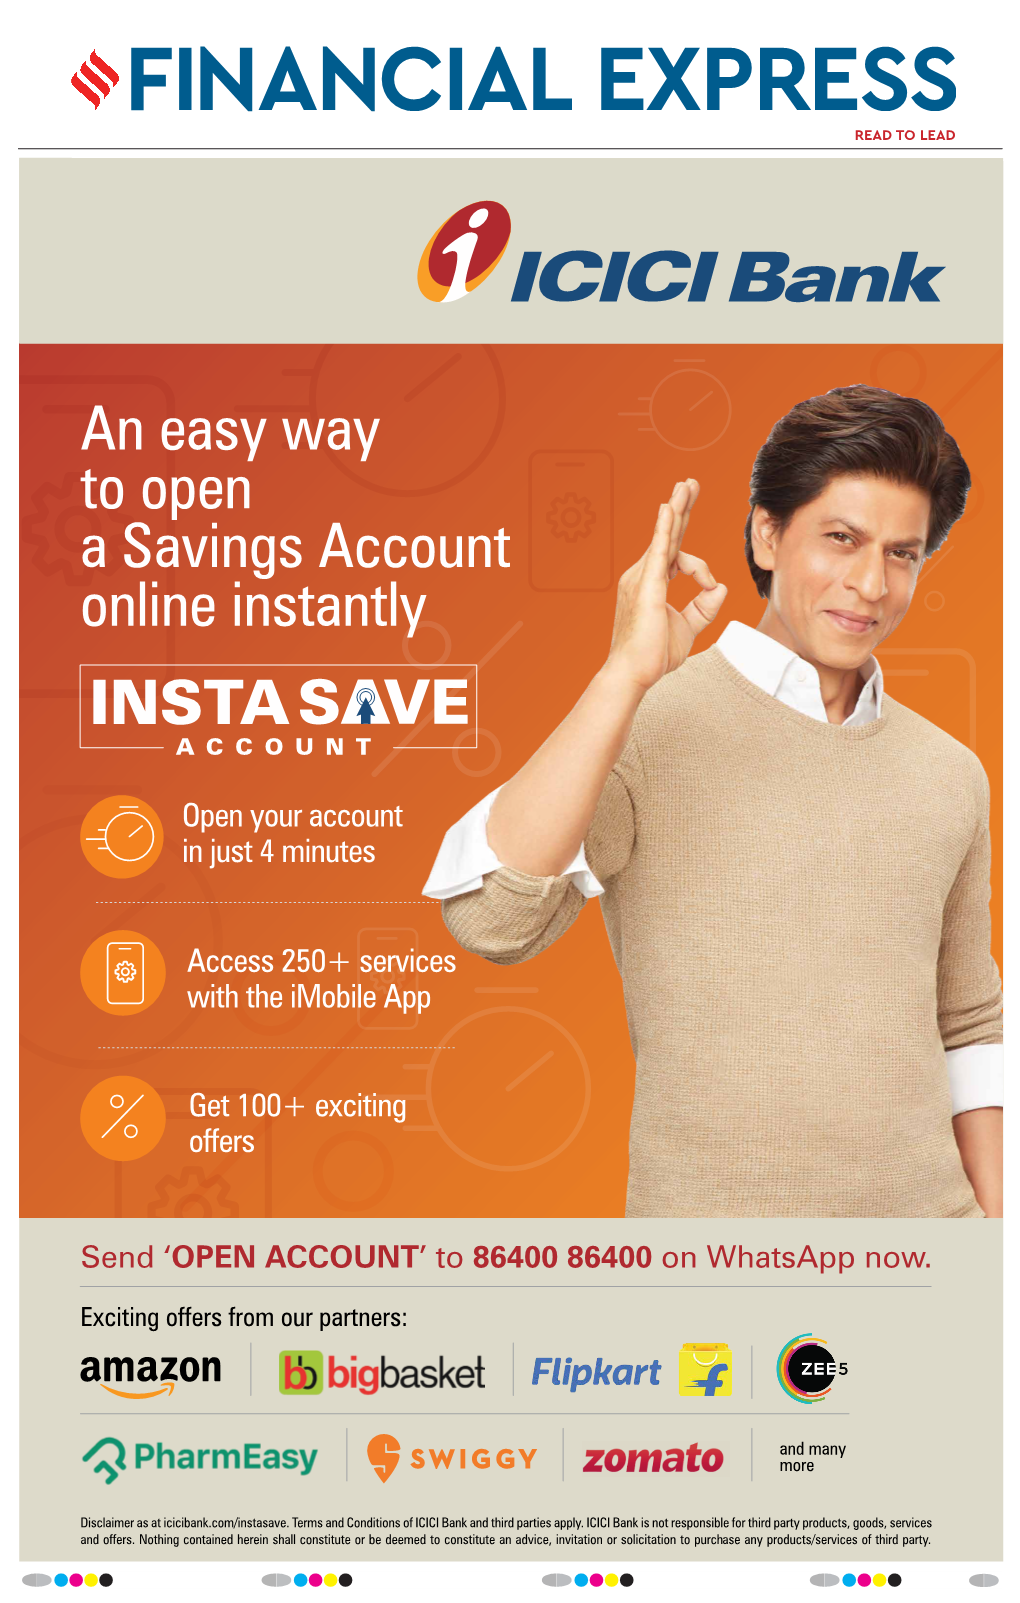 Get 100+ Exciting Offers Access 250+ Services with the Imobile App Open Your Account in Just 4 Minutes